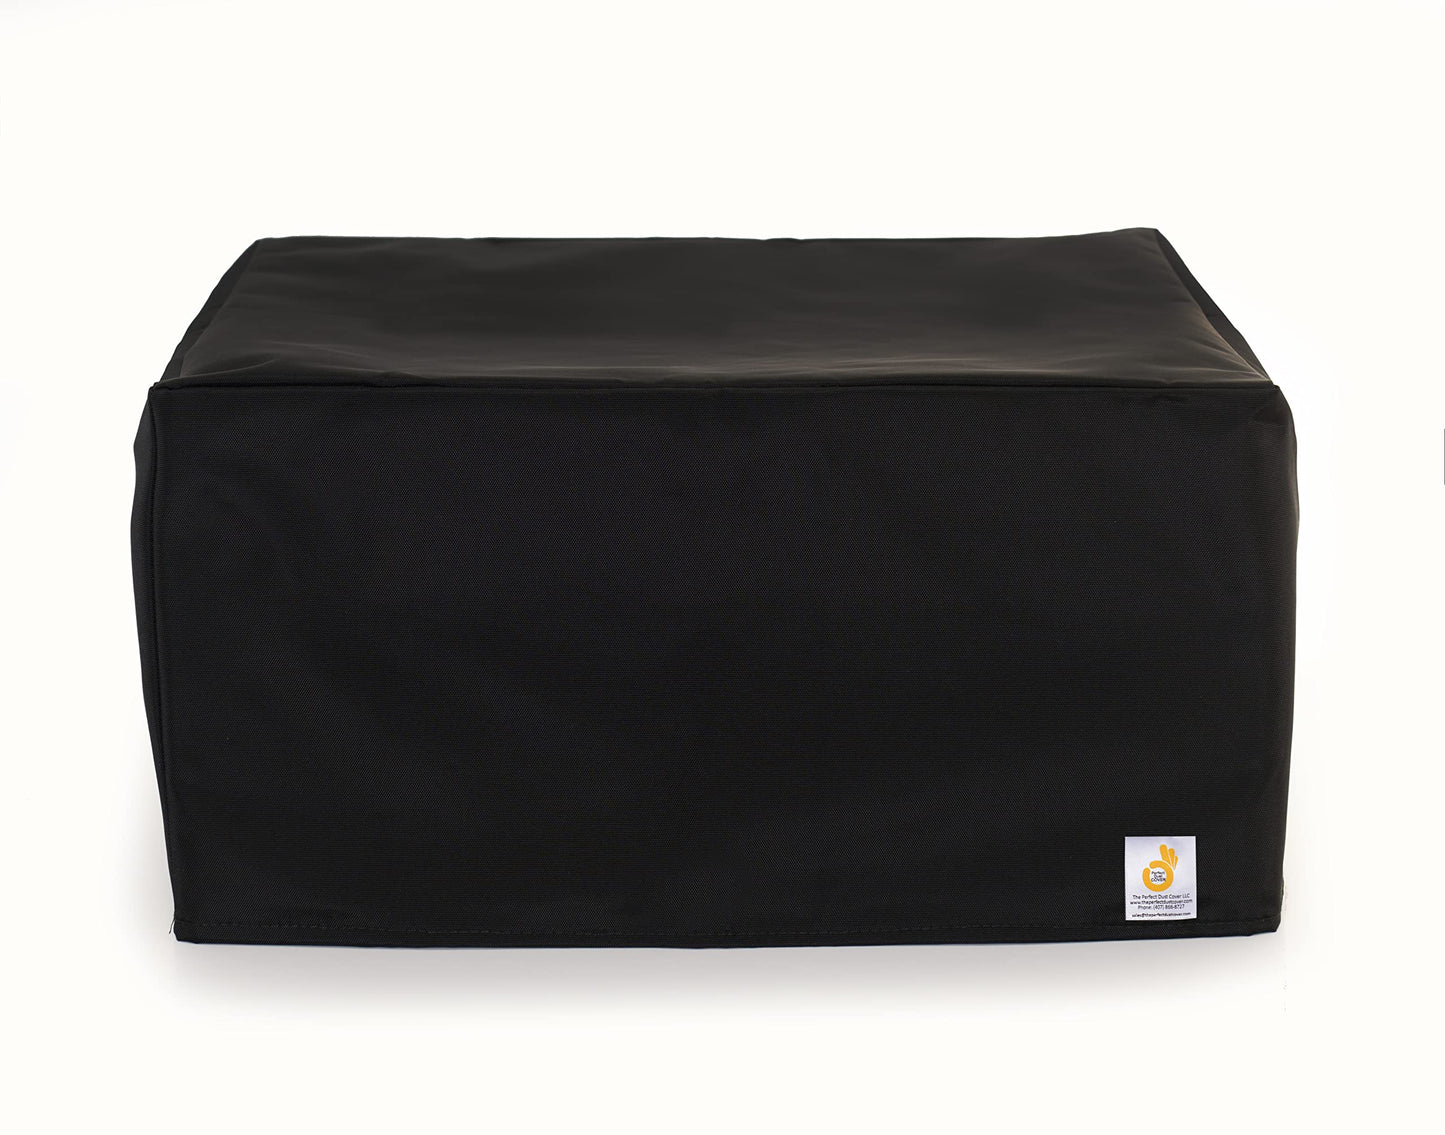 The Perfect Dust Cover, Black Nylon Cover for HP Neverstop MFP 1202w White-and-Black Laser Printer, Anti Static, Double-Stitched and Waterproof Cover by The Perfect Dust Cover LLC